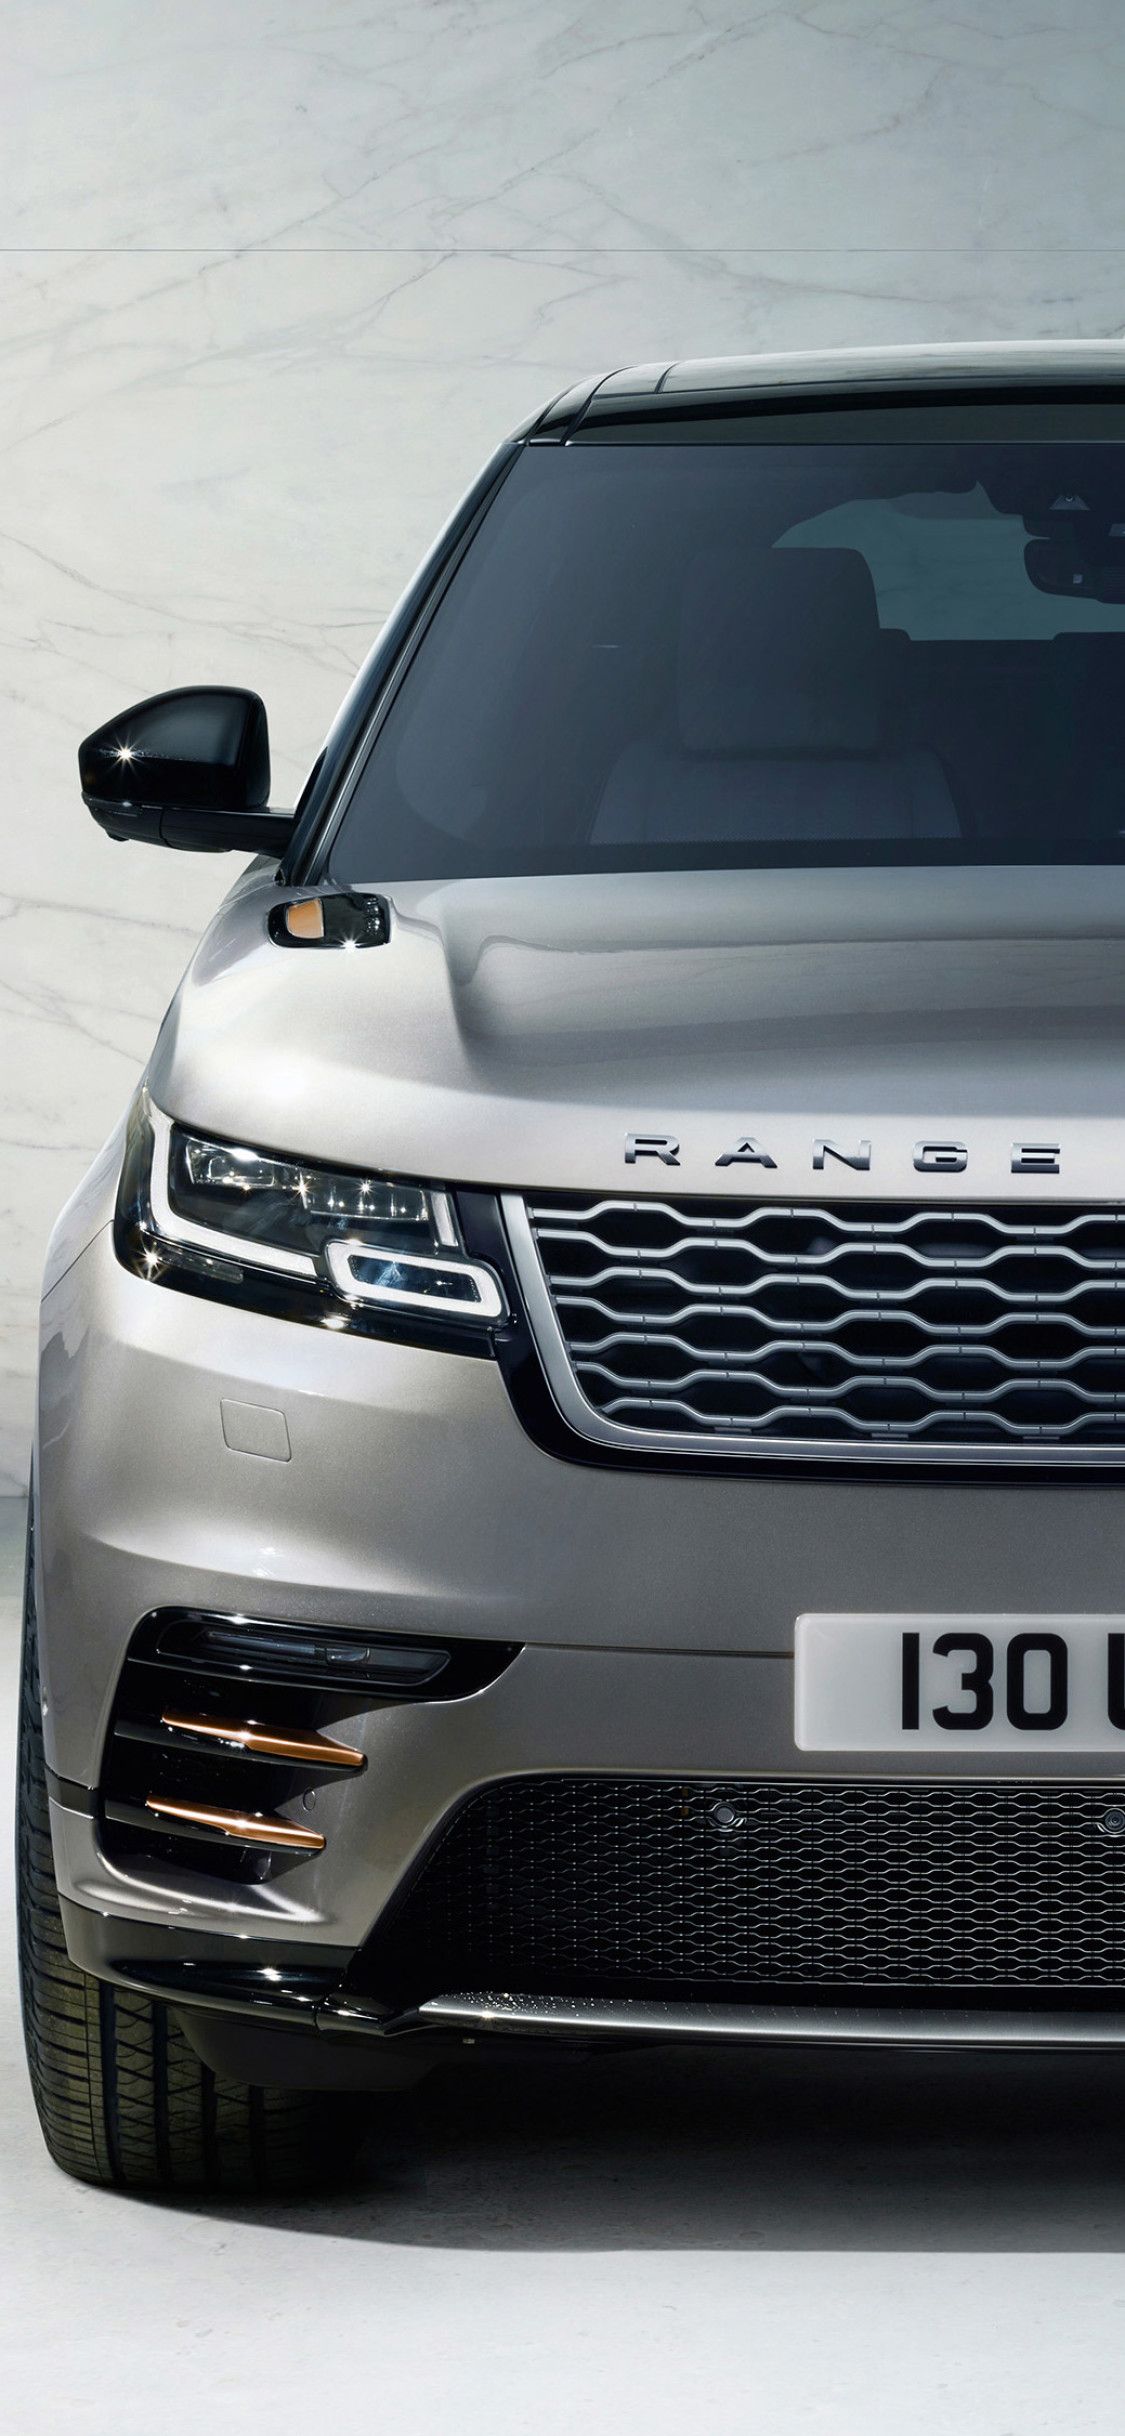 Range Rover Velar 2018 iPhone XS, iPhone iPhone X HD 4k Wallpaper, Image, Background, Photo and Picture